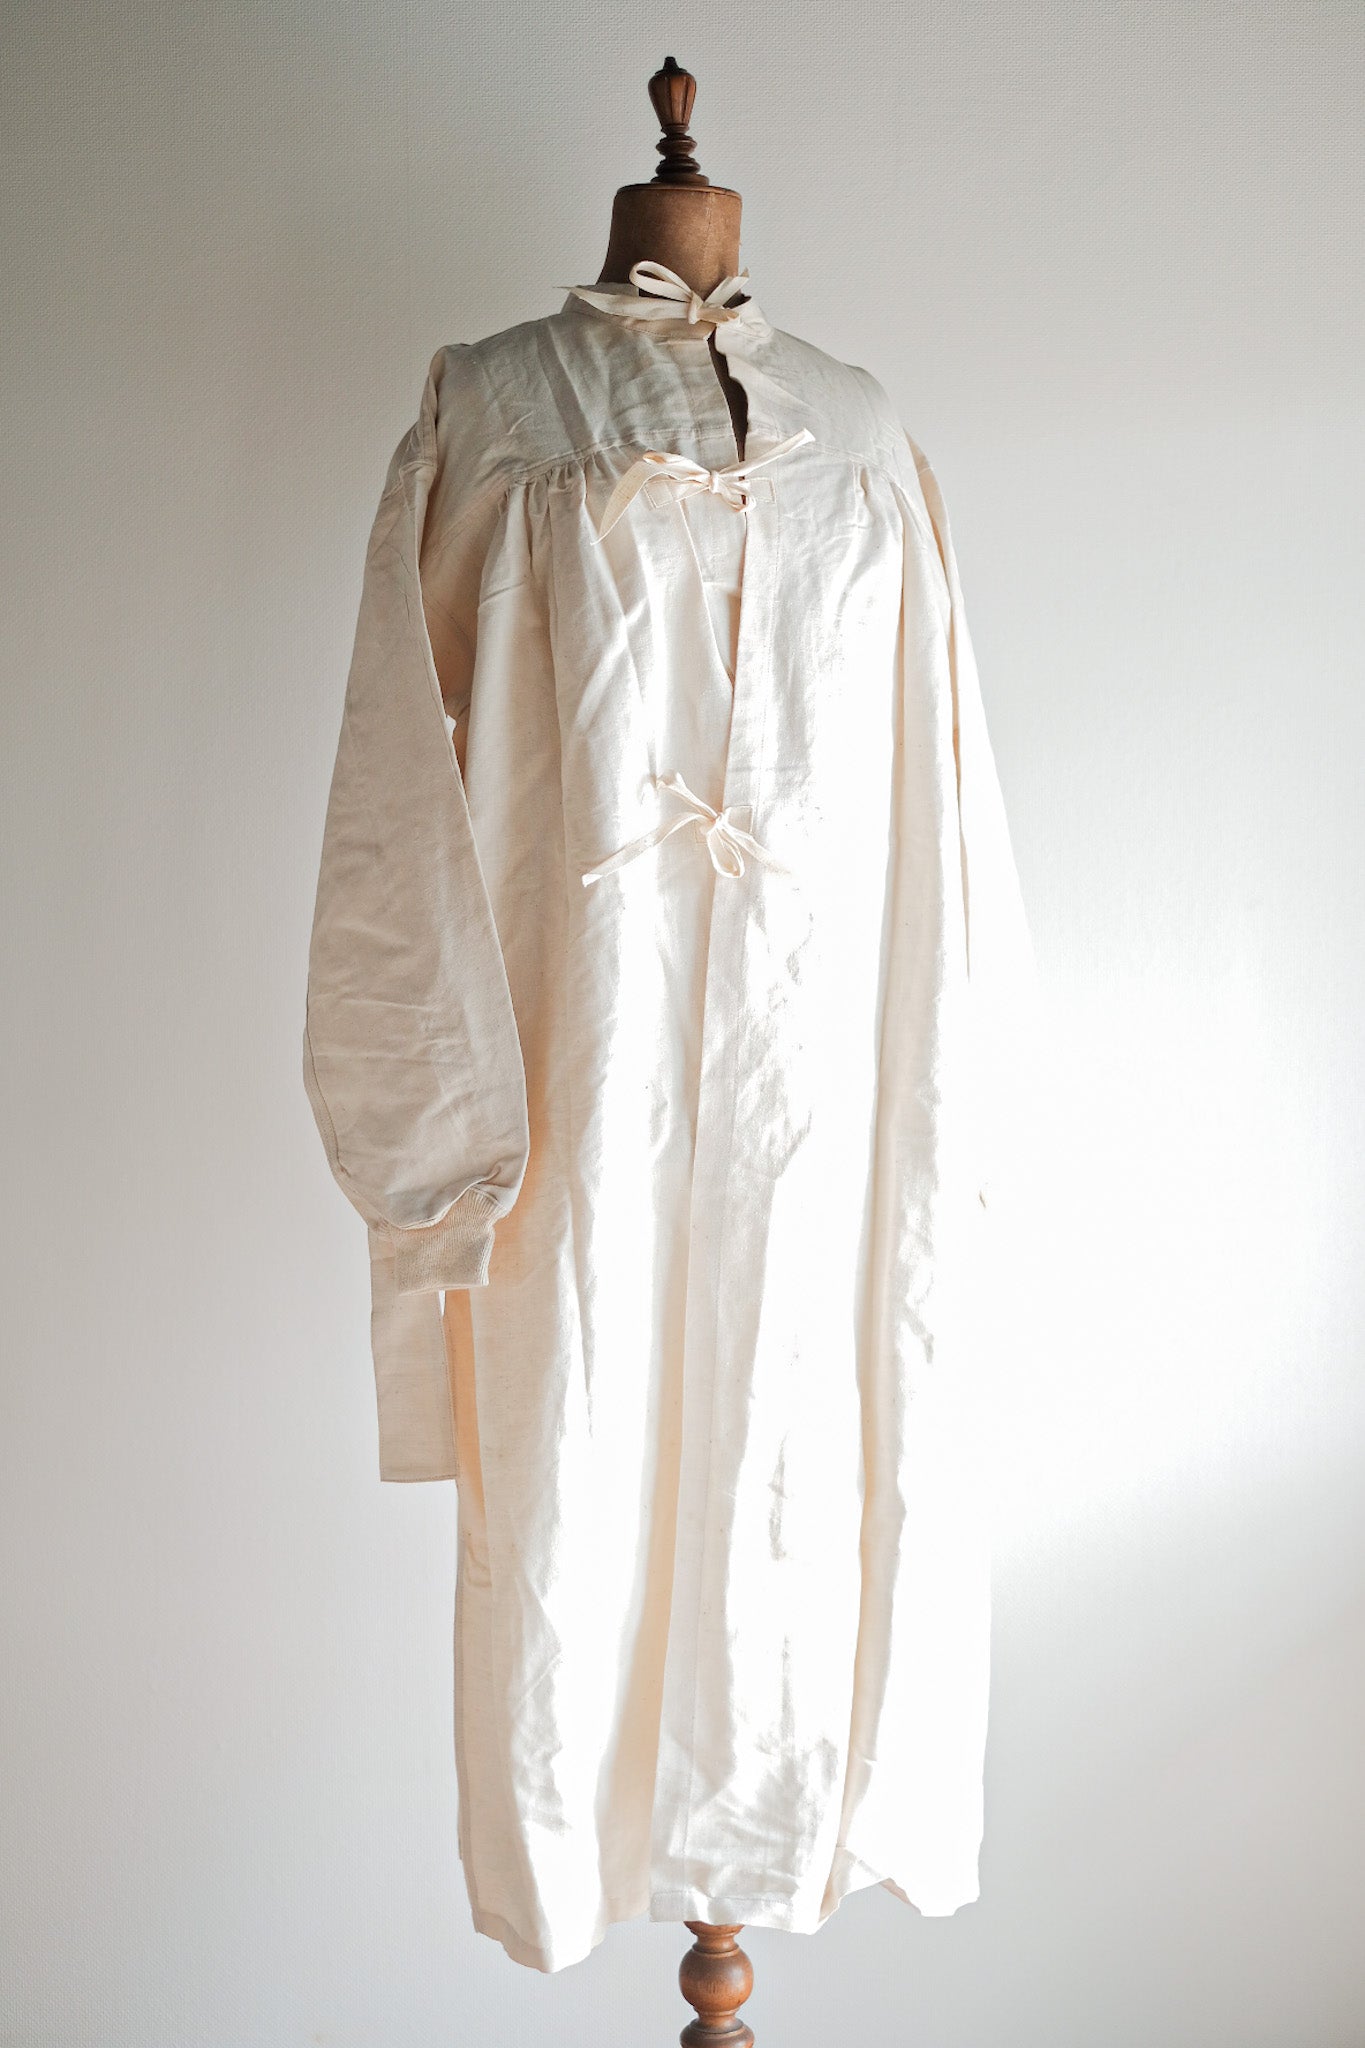 [~ 50's] French Army Surgeon Linen COAT HOSPITALY MILITARY "DEAD STOCK"